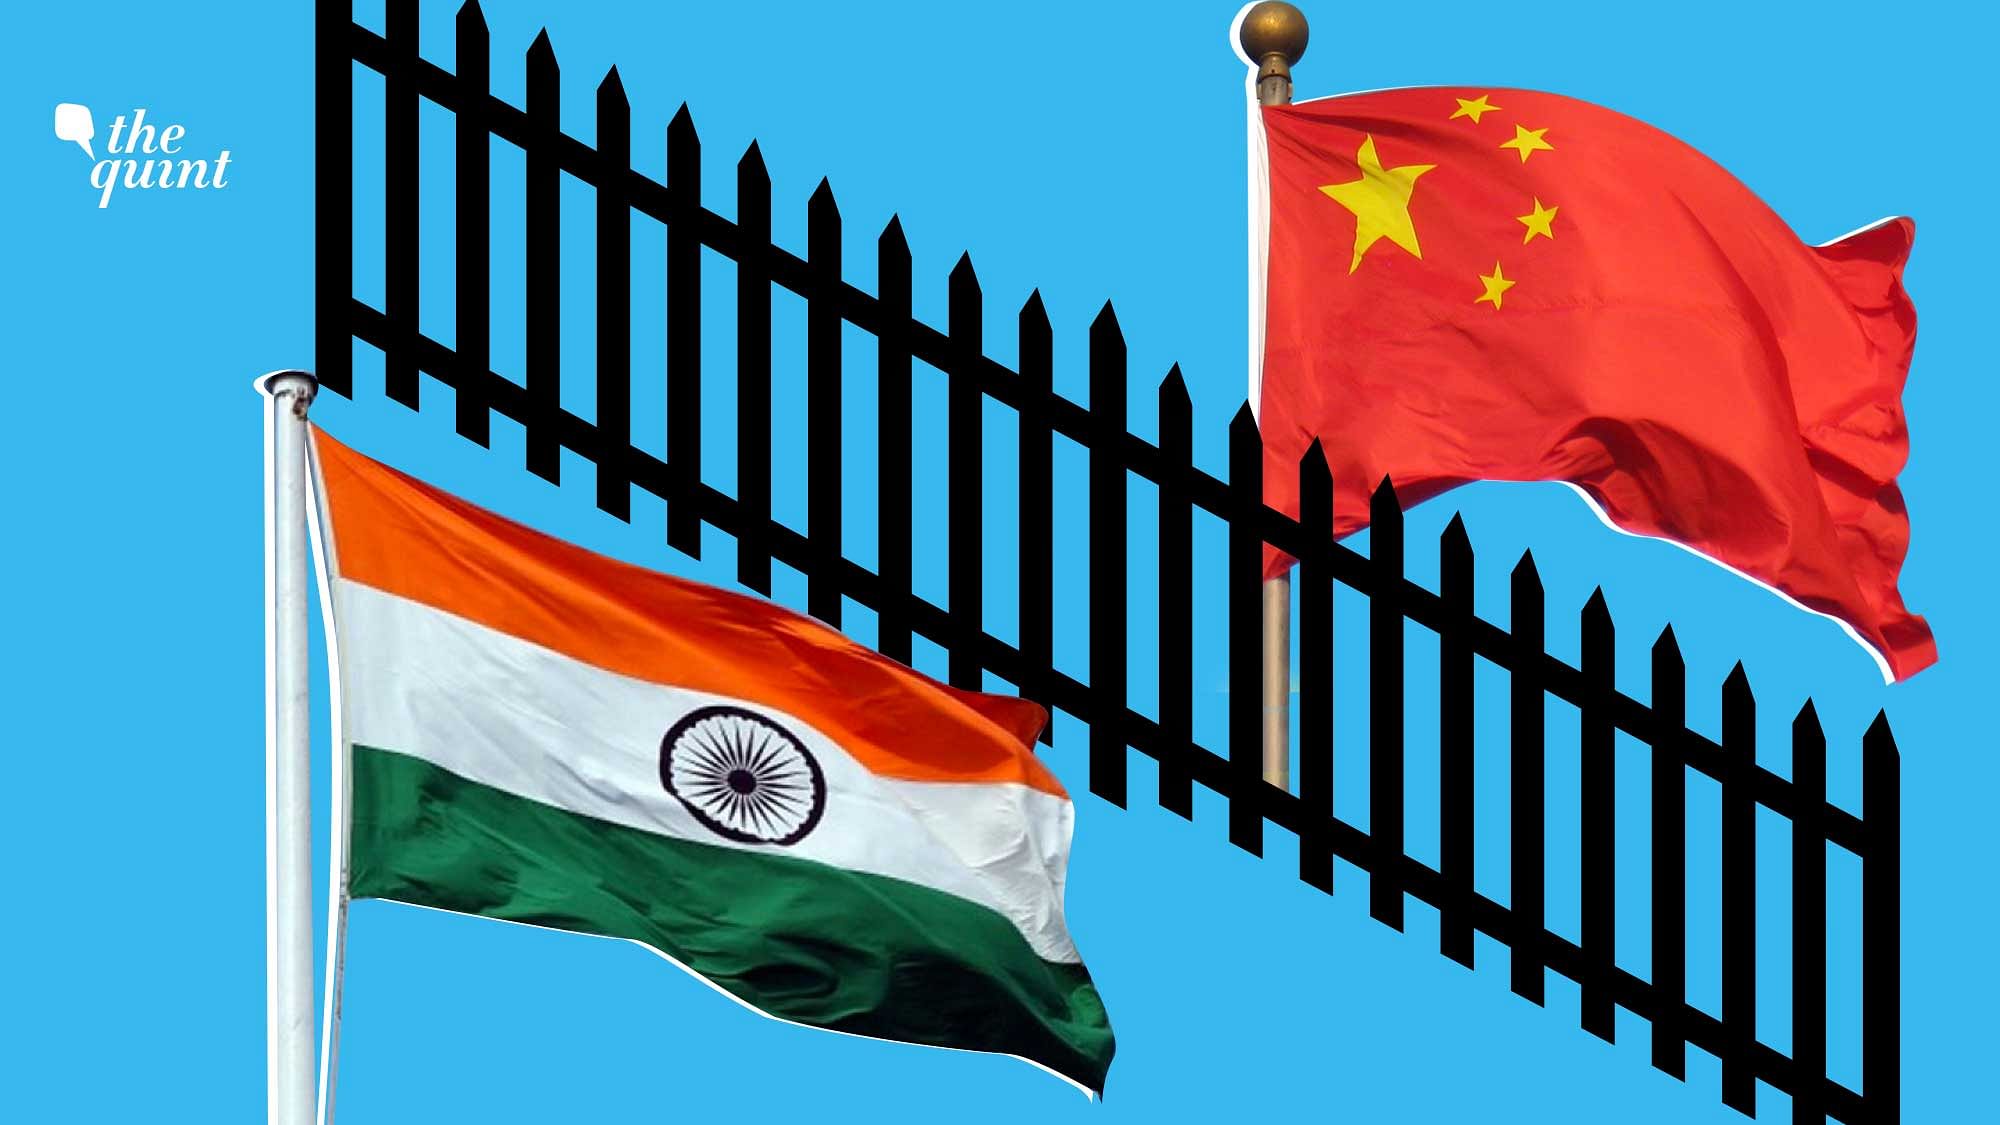 Image of Indian and Chinese flags used for representation.